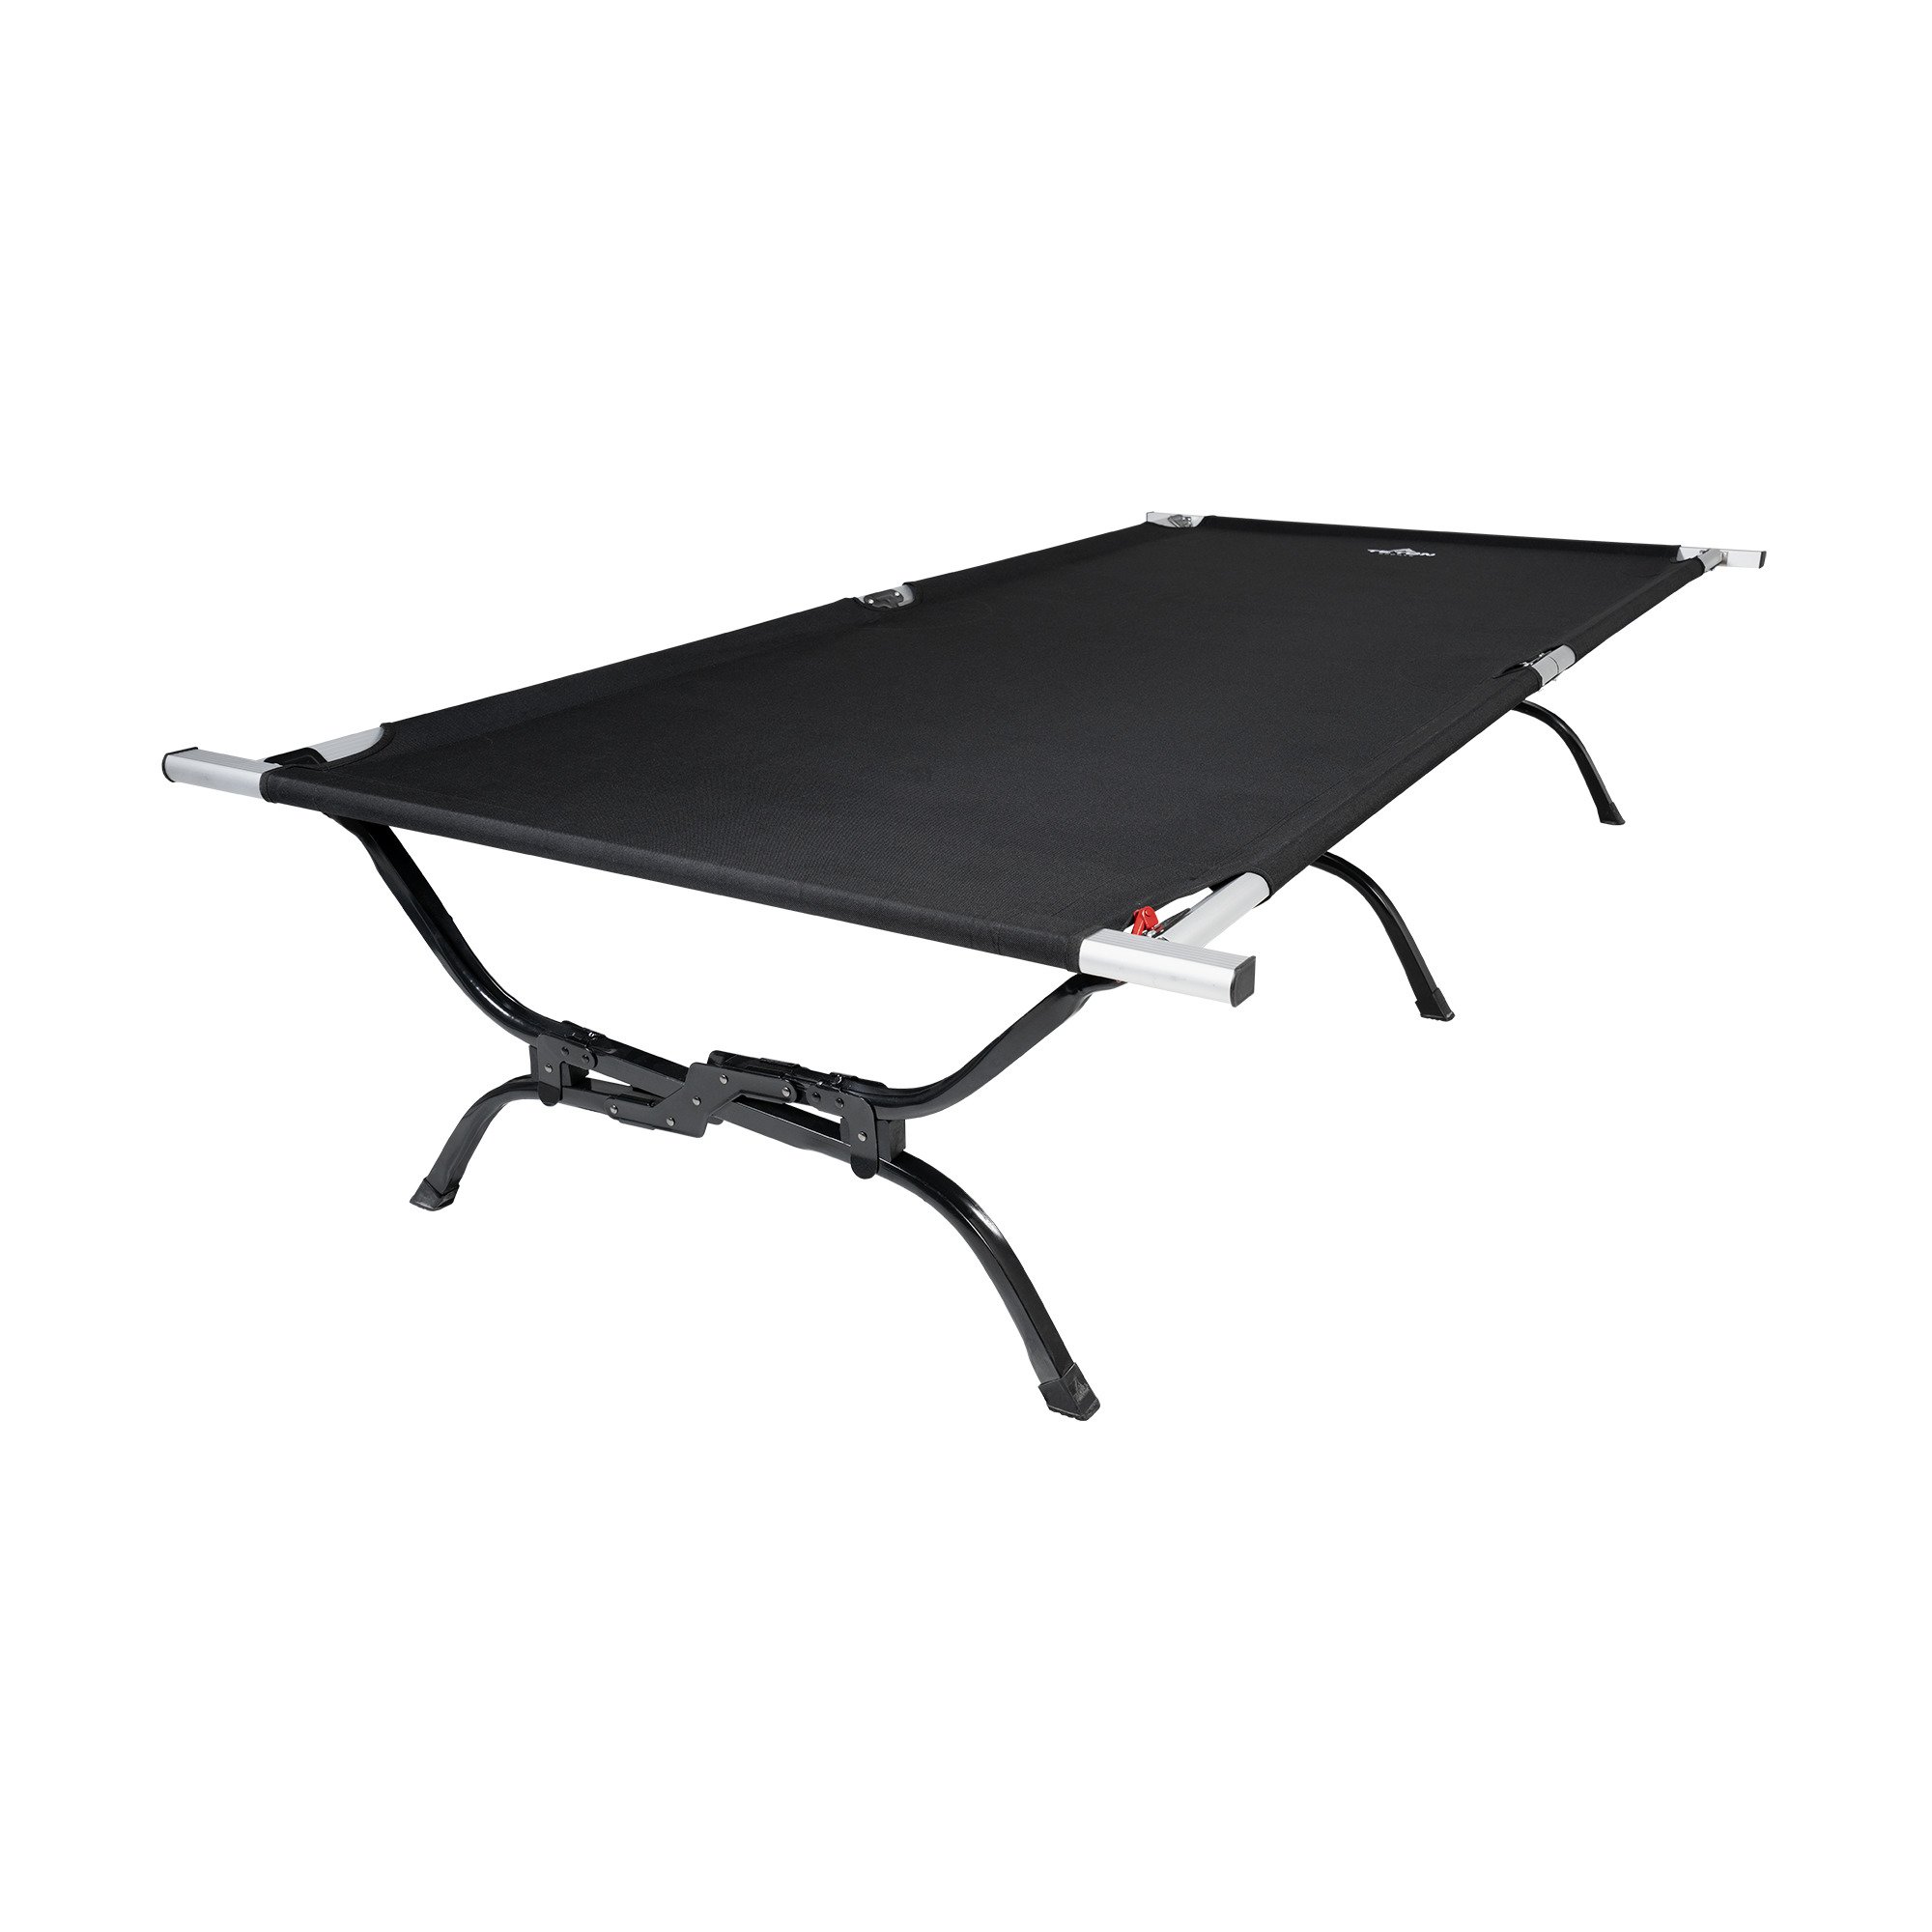 TETON OUTFITTER XXL COT (LIMITED EDITION)